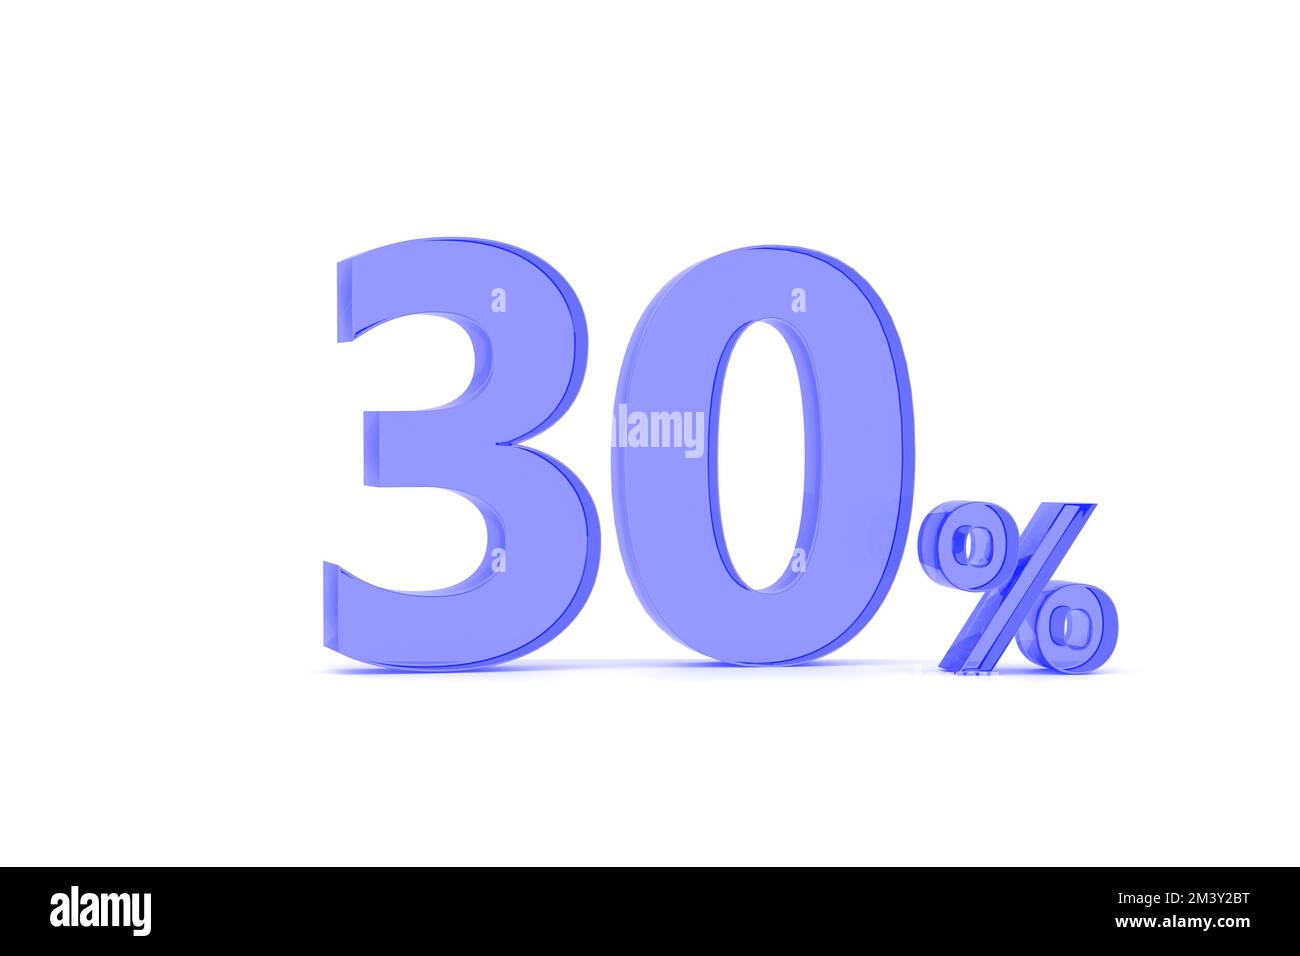 3D. Percentage icon 3D in red glass on white background 3d illustration Stock Photo